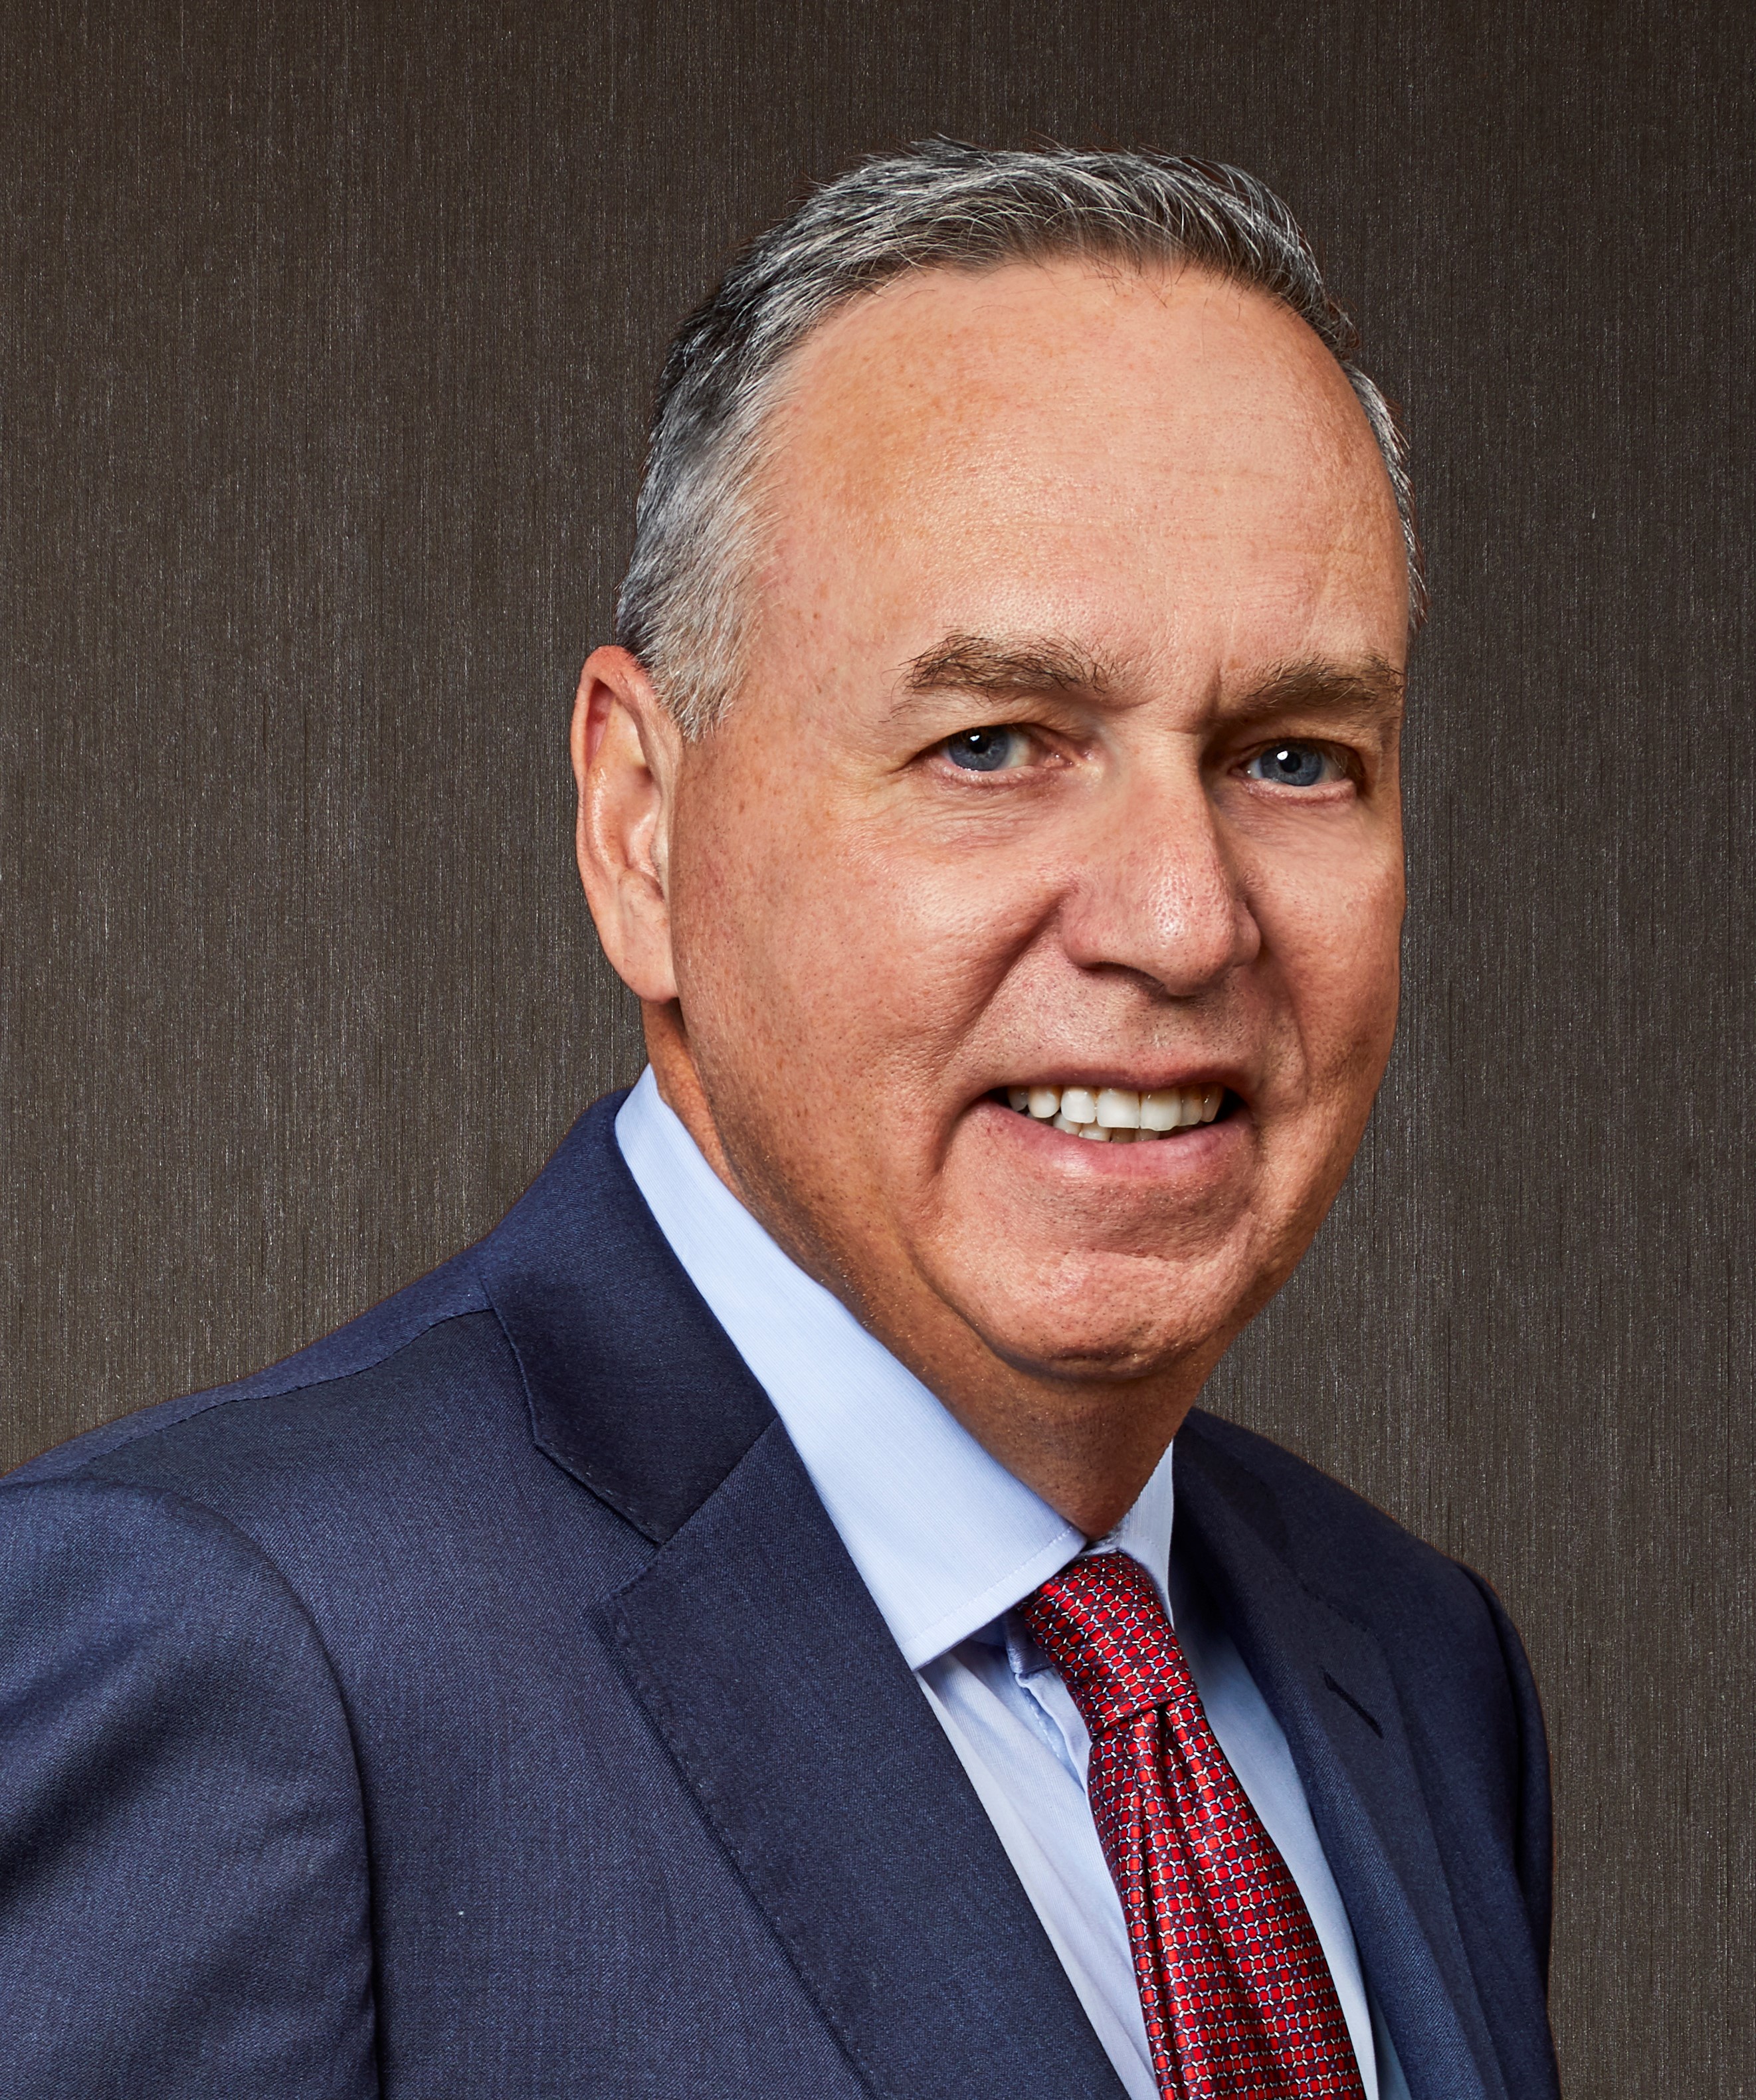 Stephen J. Squeri, Chairman and Chief Executive Officer, American